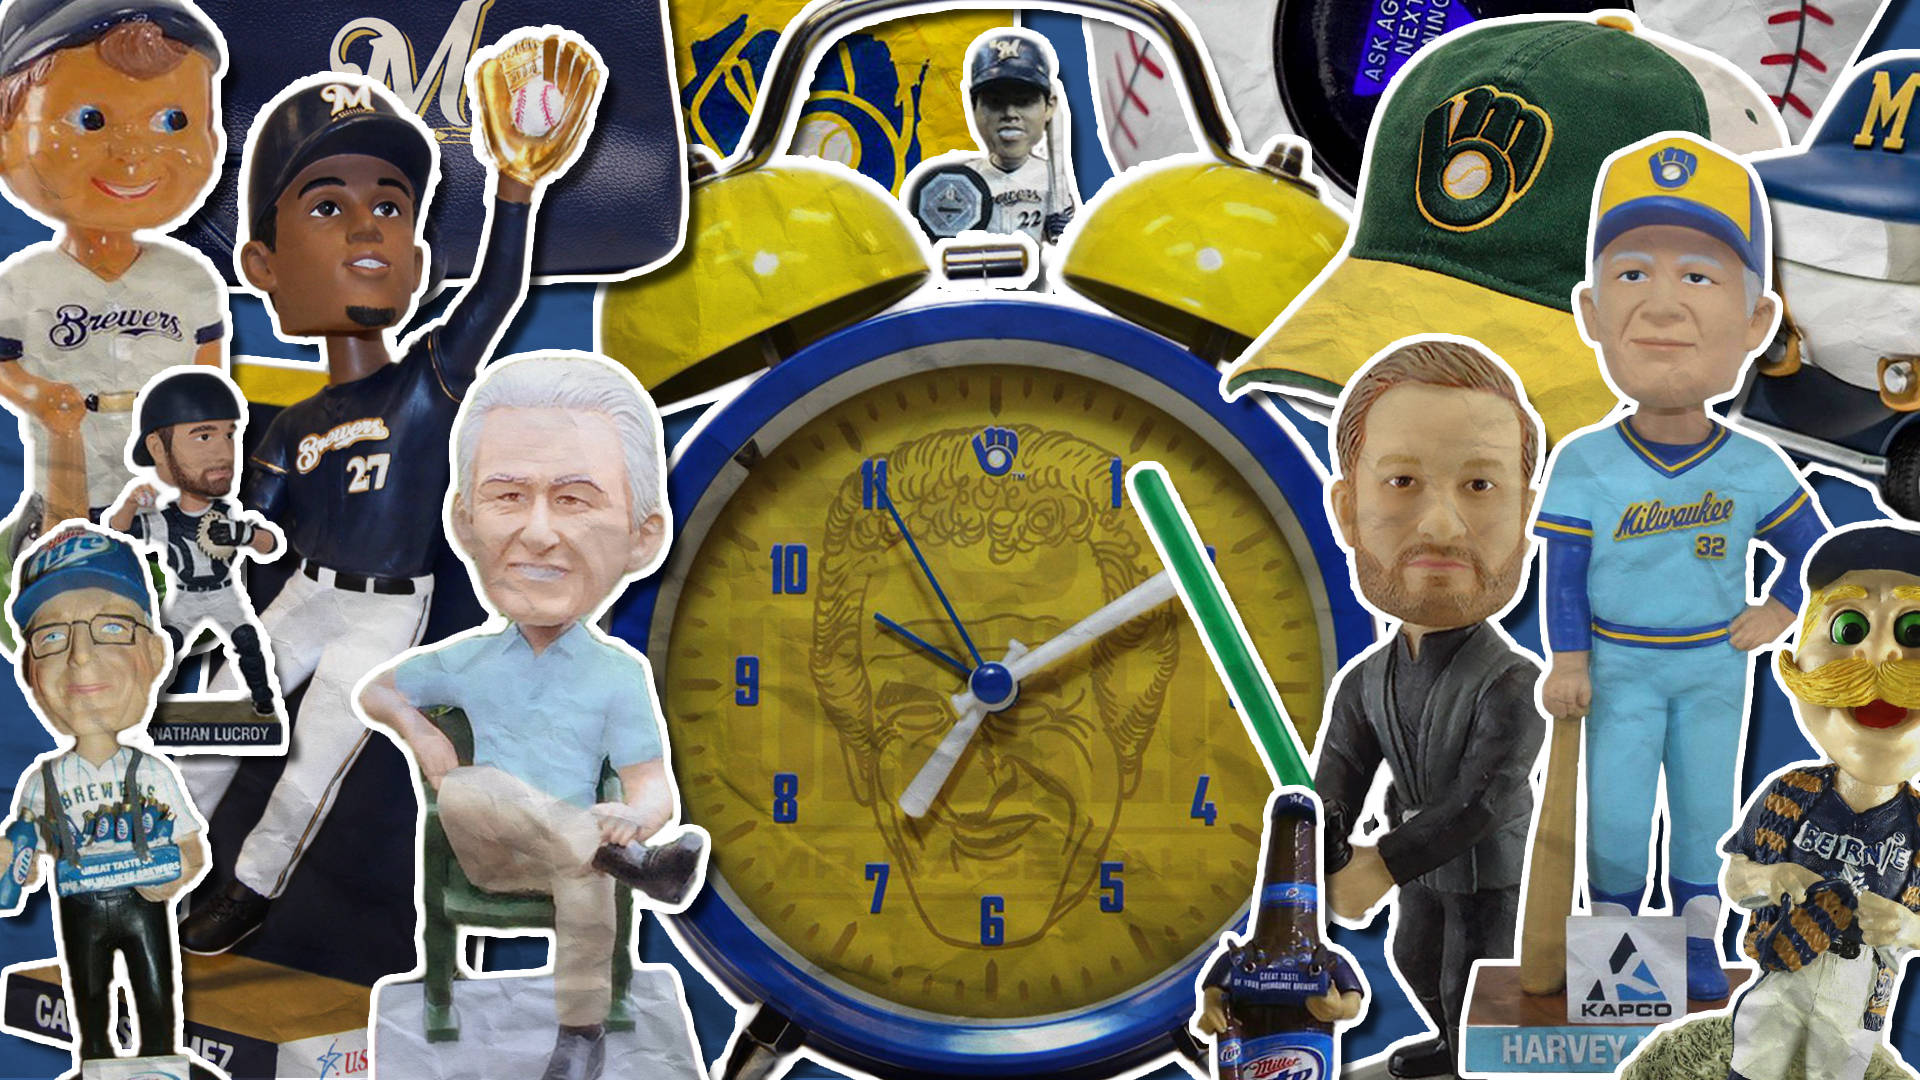 Milwaukee Brewers Bobbleheads Collage Wallpaper